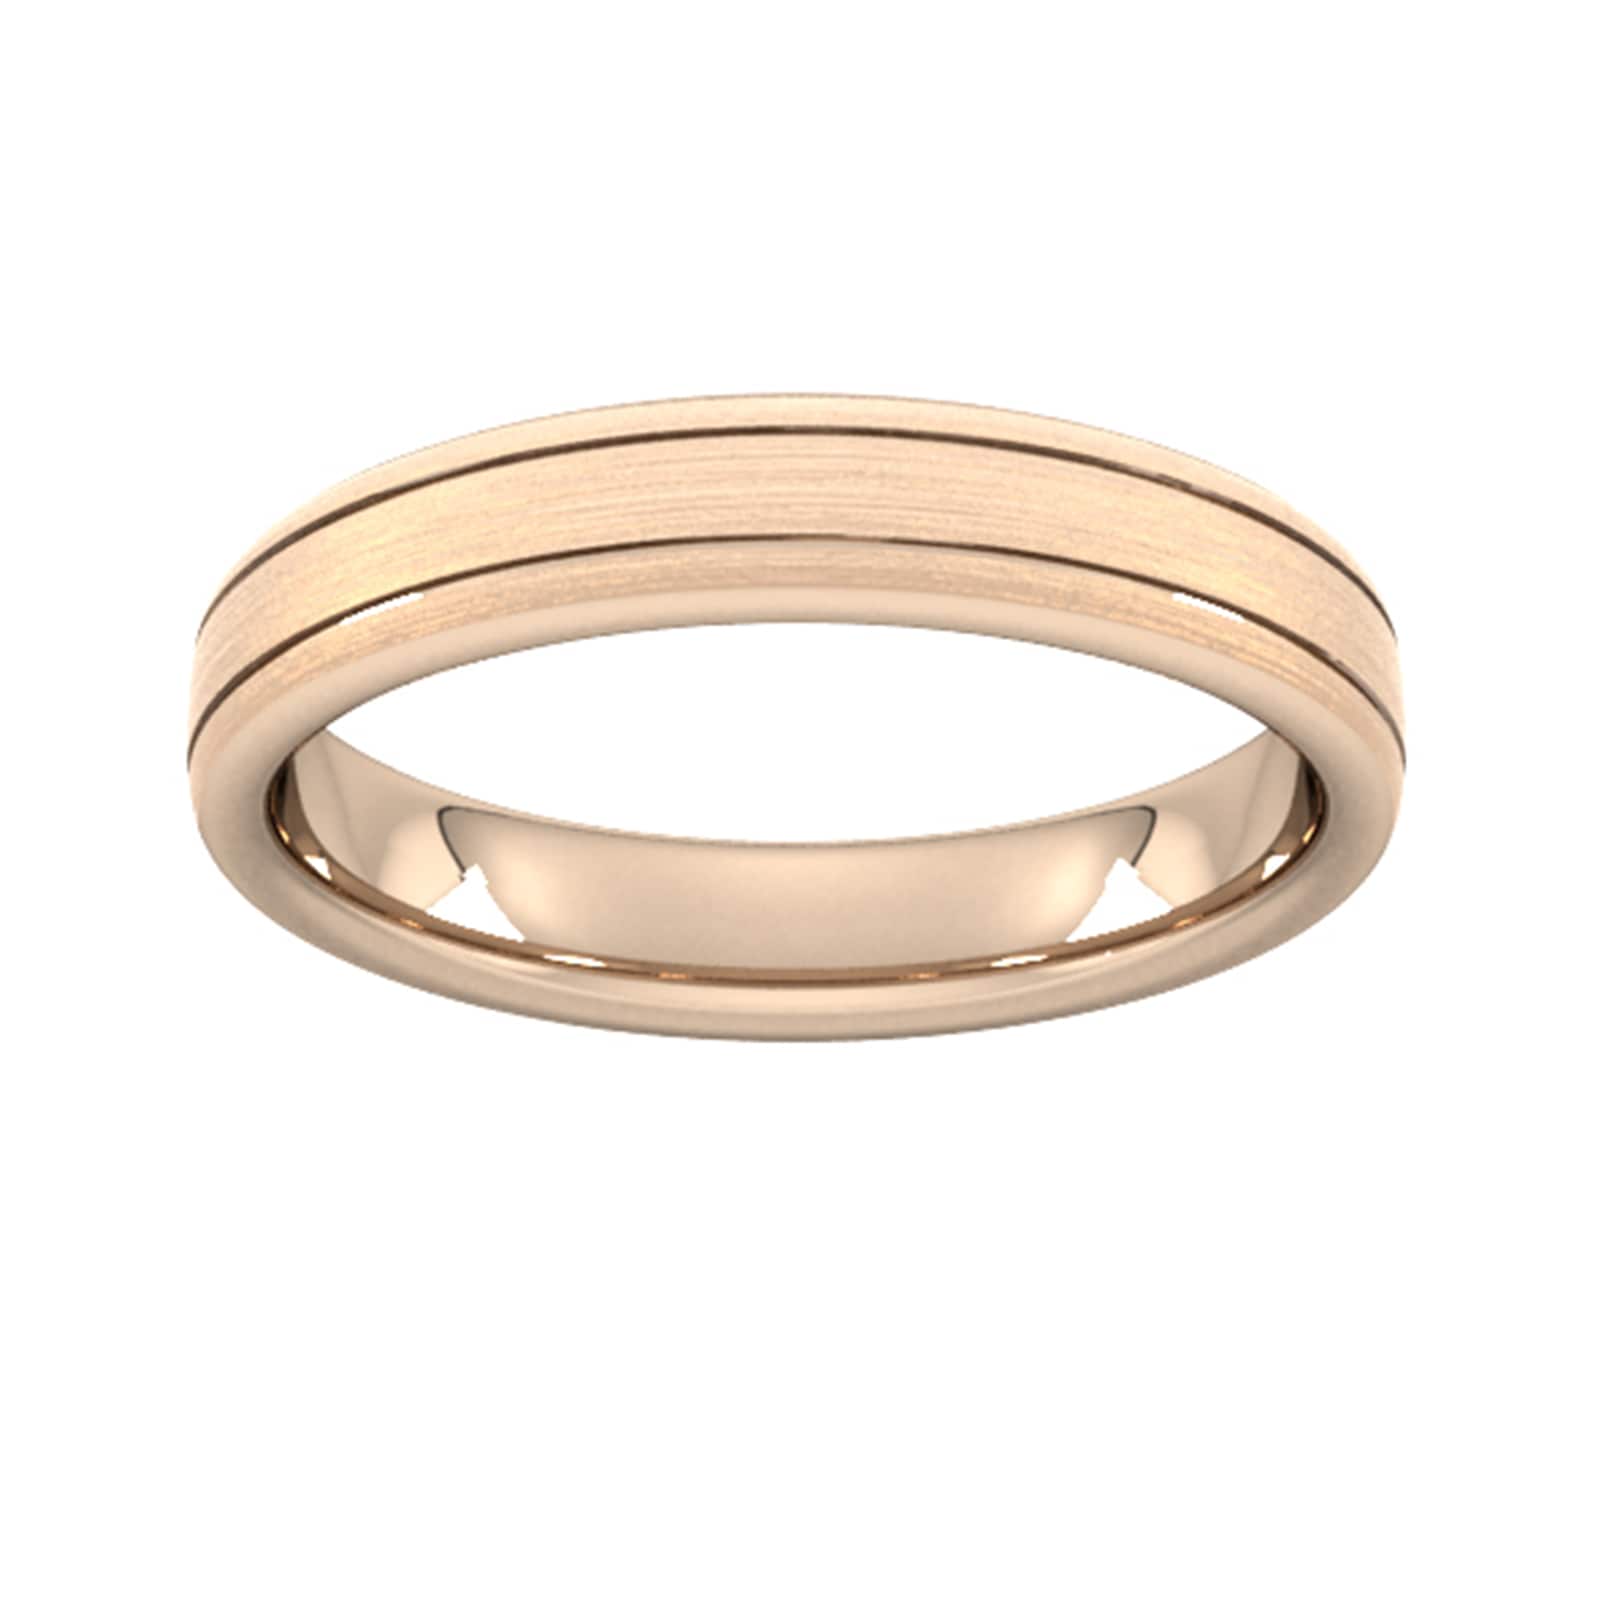 4mm Slight Court Extra Heavy Matt Finish With Double Grooves Wedding Ring In 18 Carat Rose Gold - Ring Size S